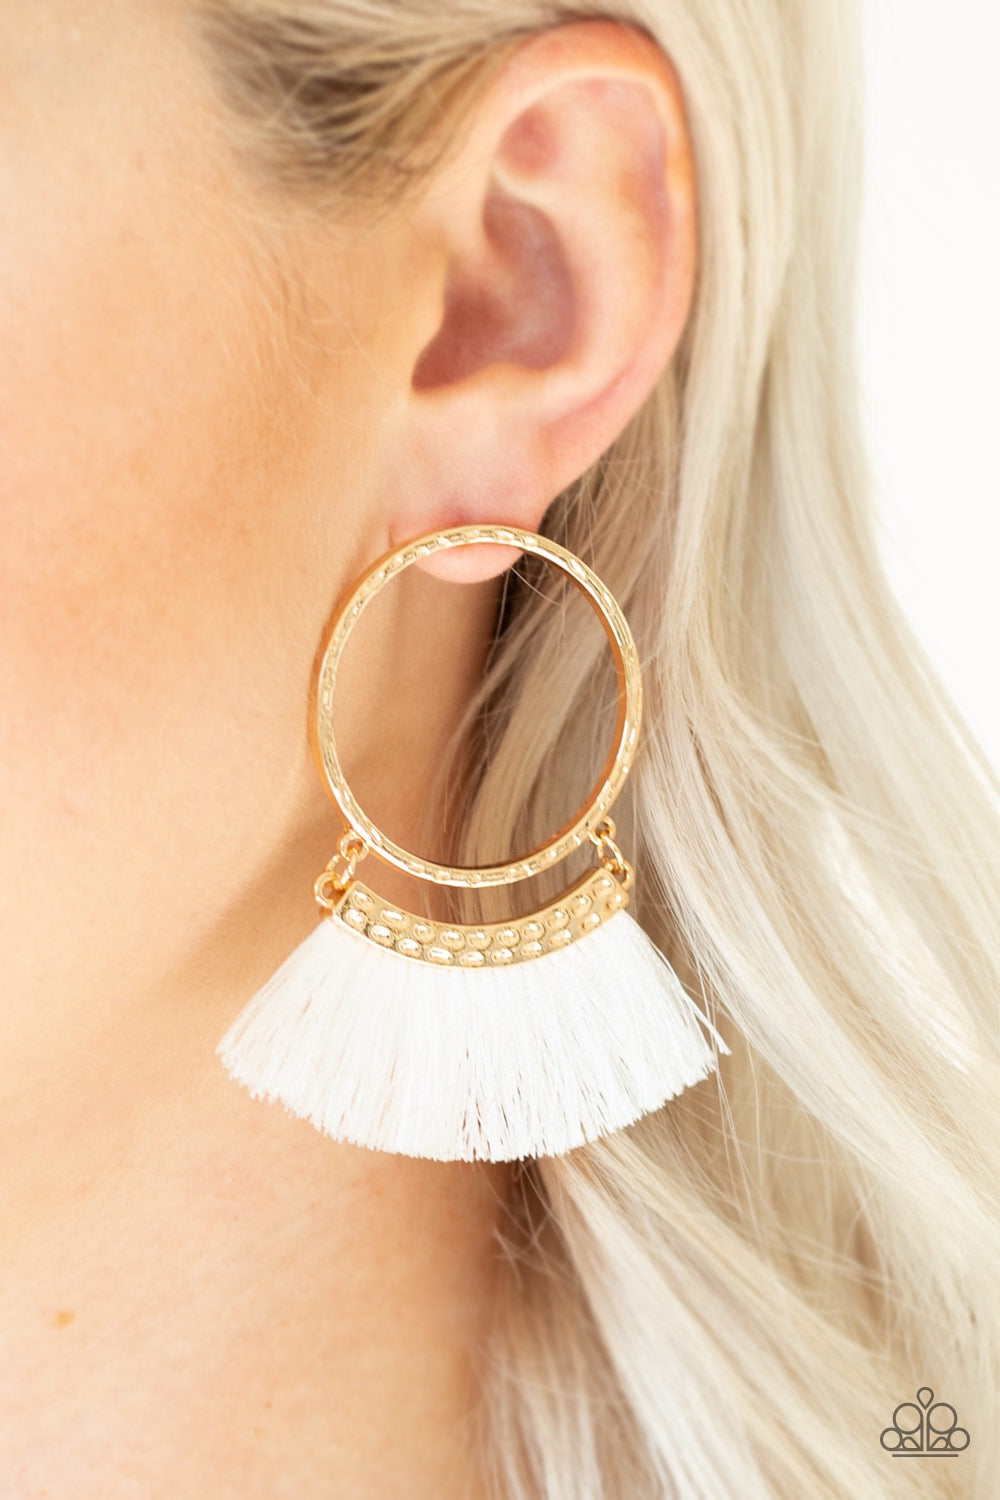 This Is Sparta! Gold Post-Earrings